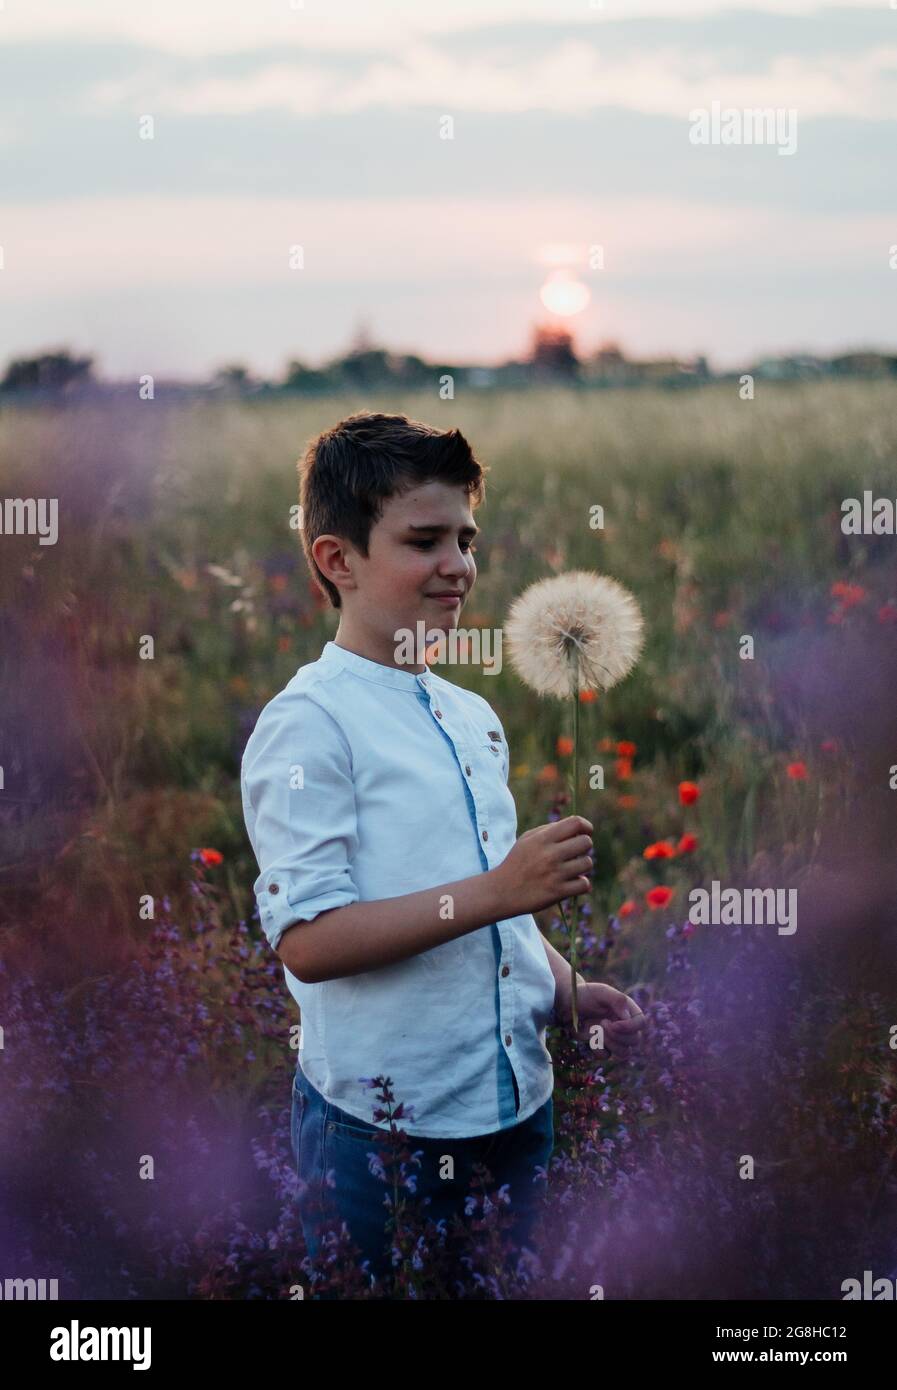 Boy plays with dandelion in the green field during sunset Stock Photo